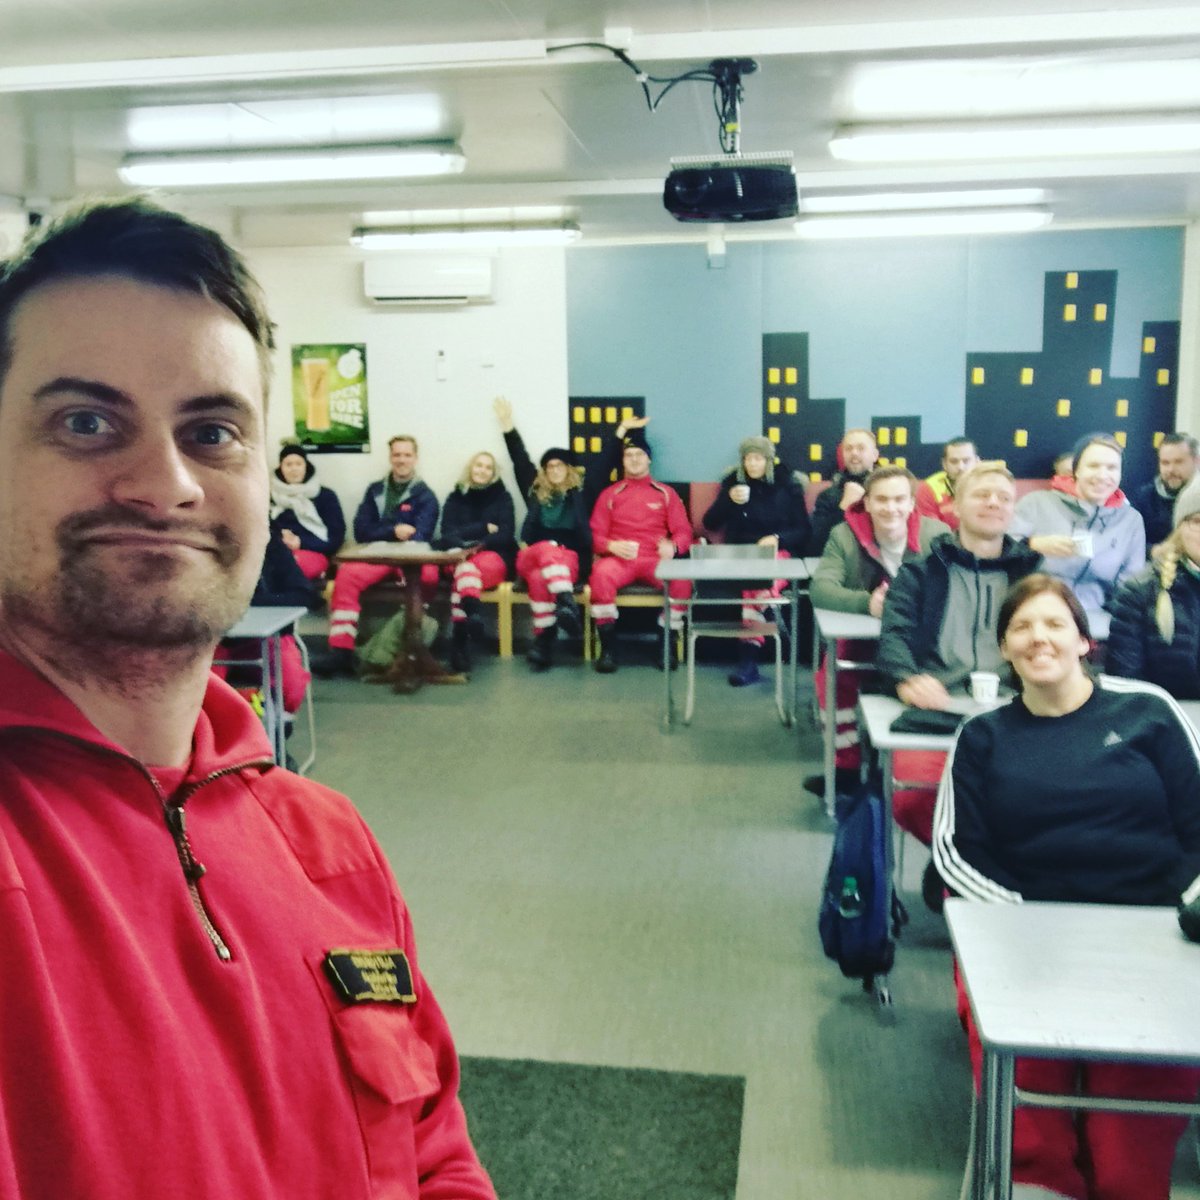 Here we go again; the annual training week with Advanced Care Paramedic course at the always awesome Pori Emergency Service Training Center. #trainasyoufight #BTSF #zeropointsurvey